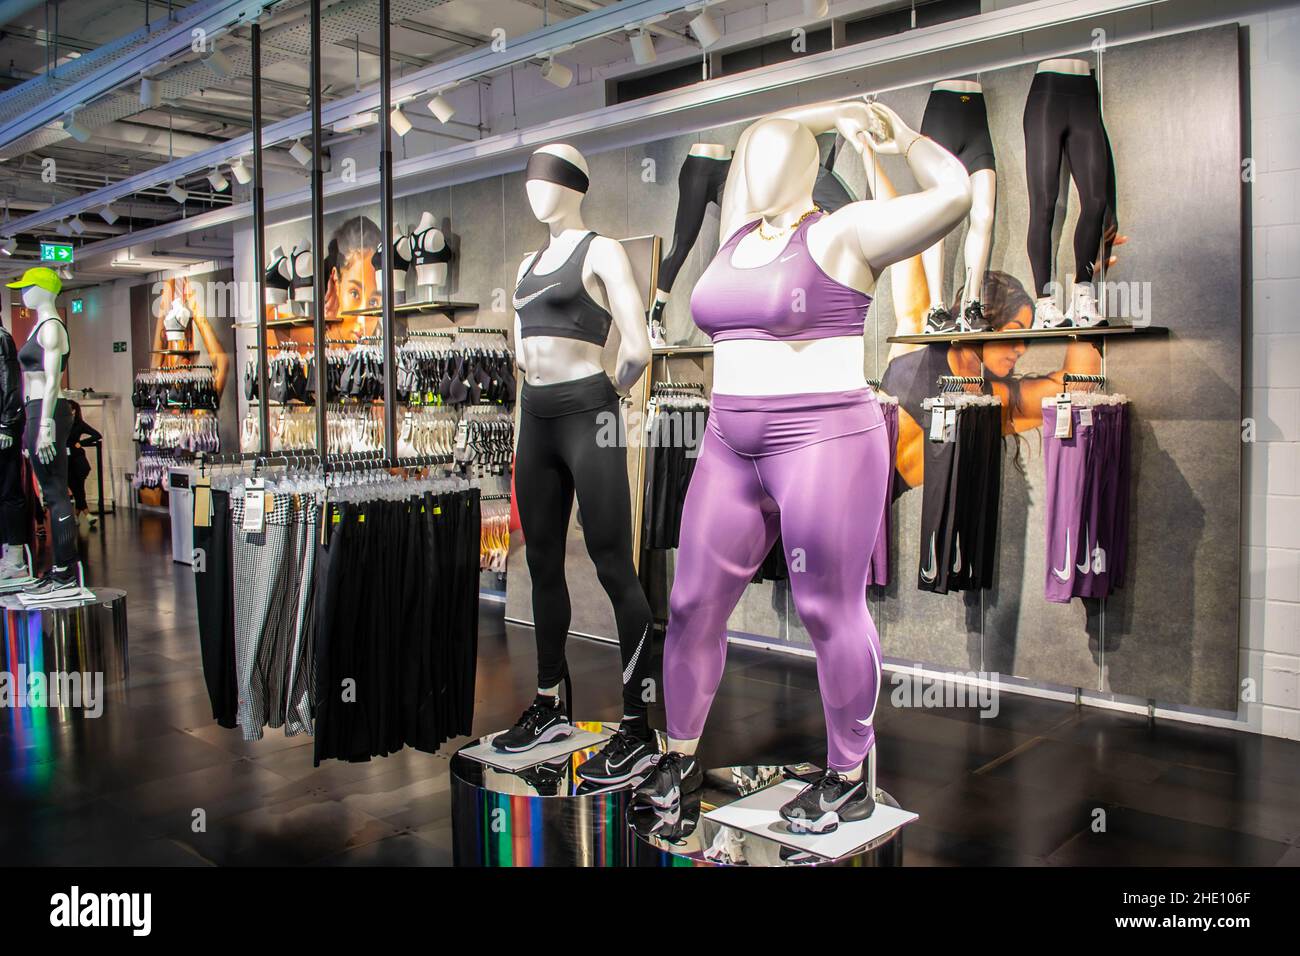 Plus Size Mannequin High Resolution Stock Photography and Images Alamy